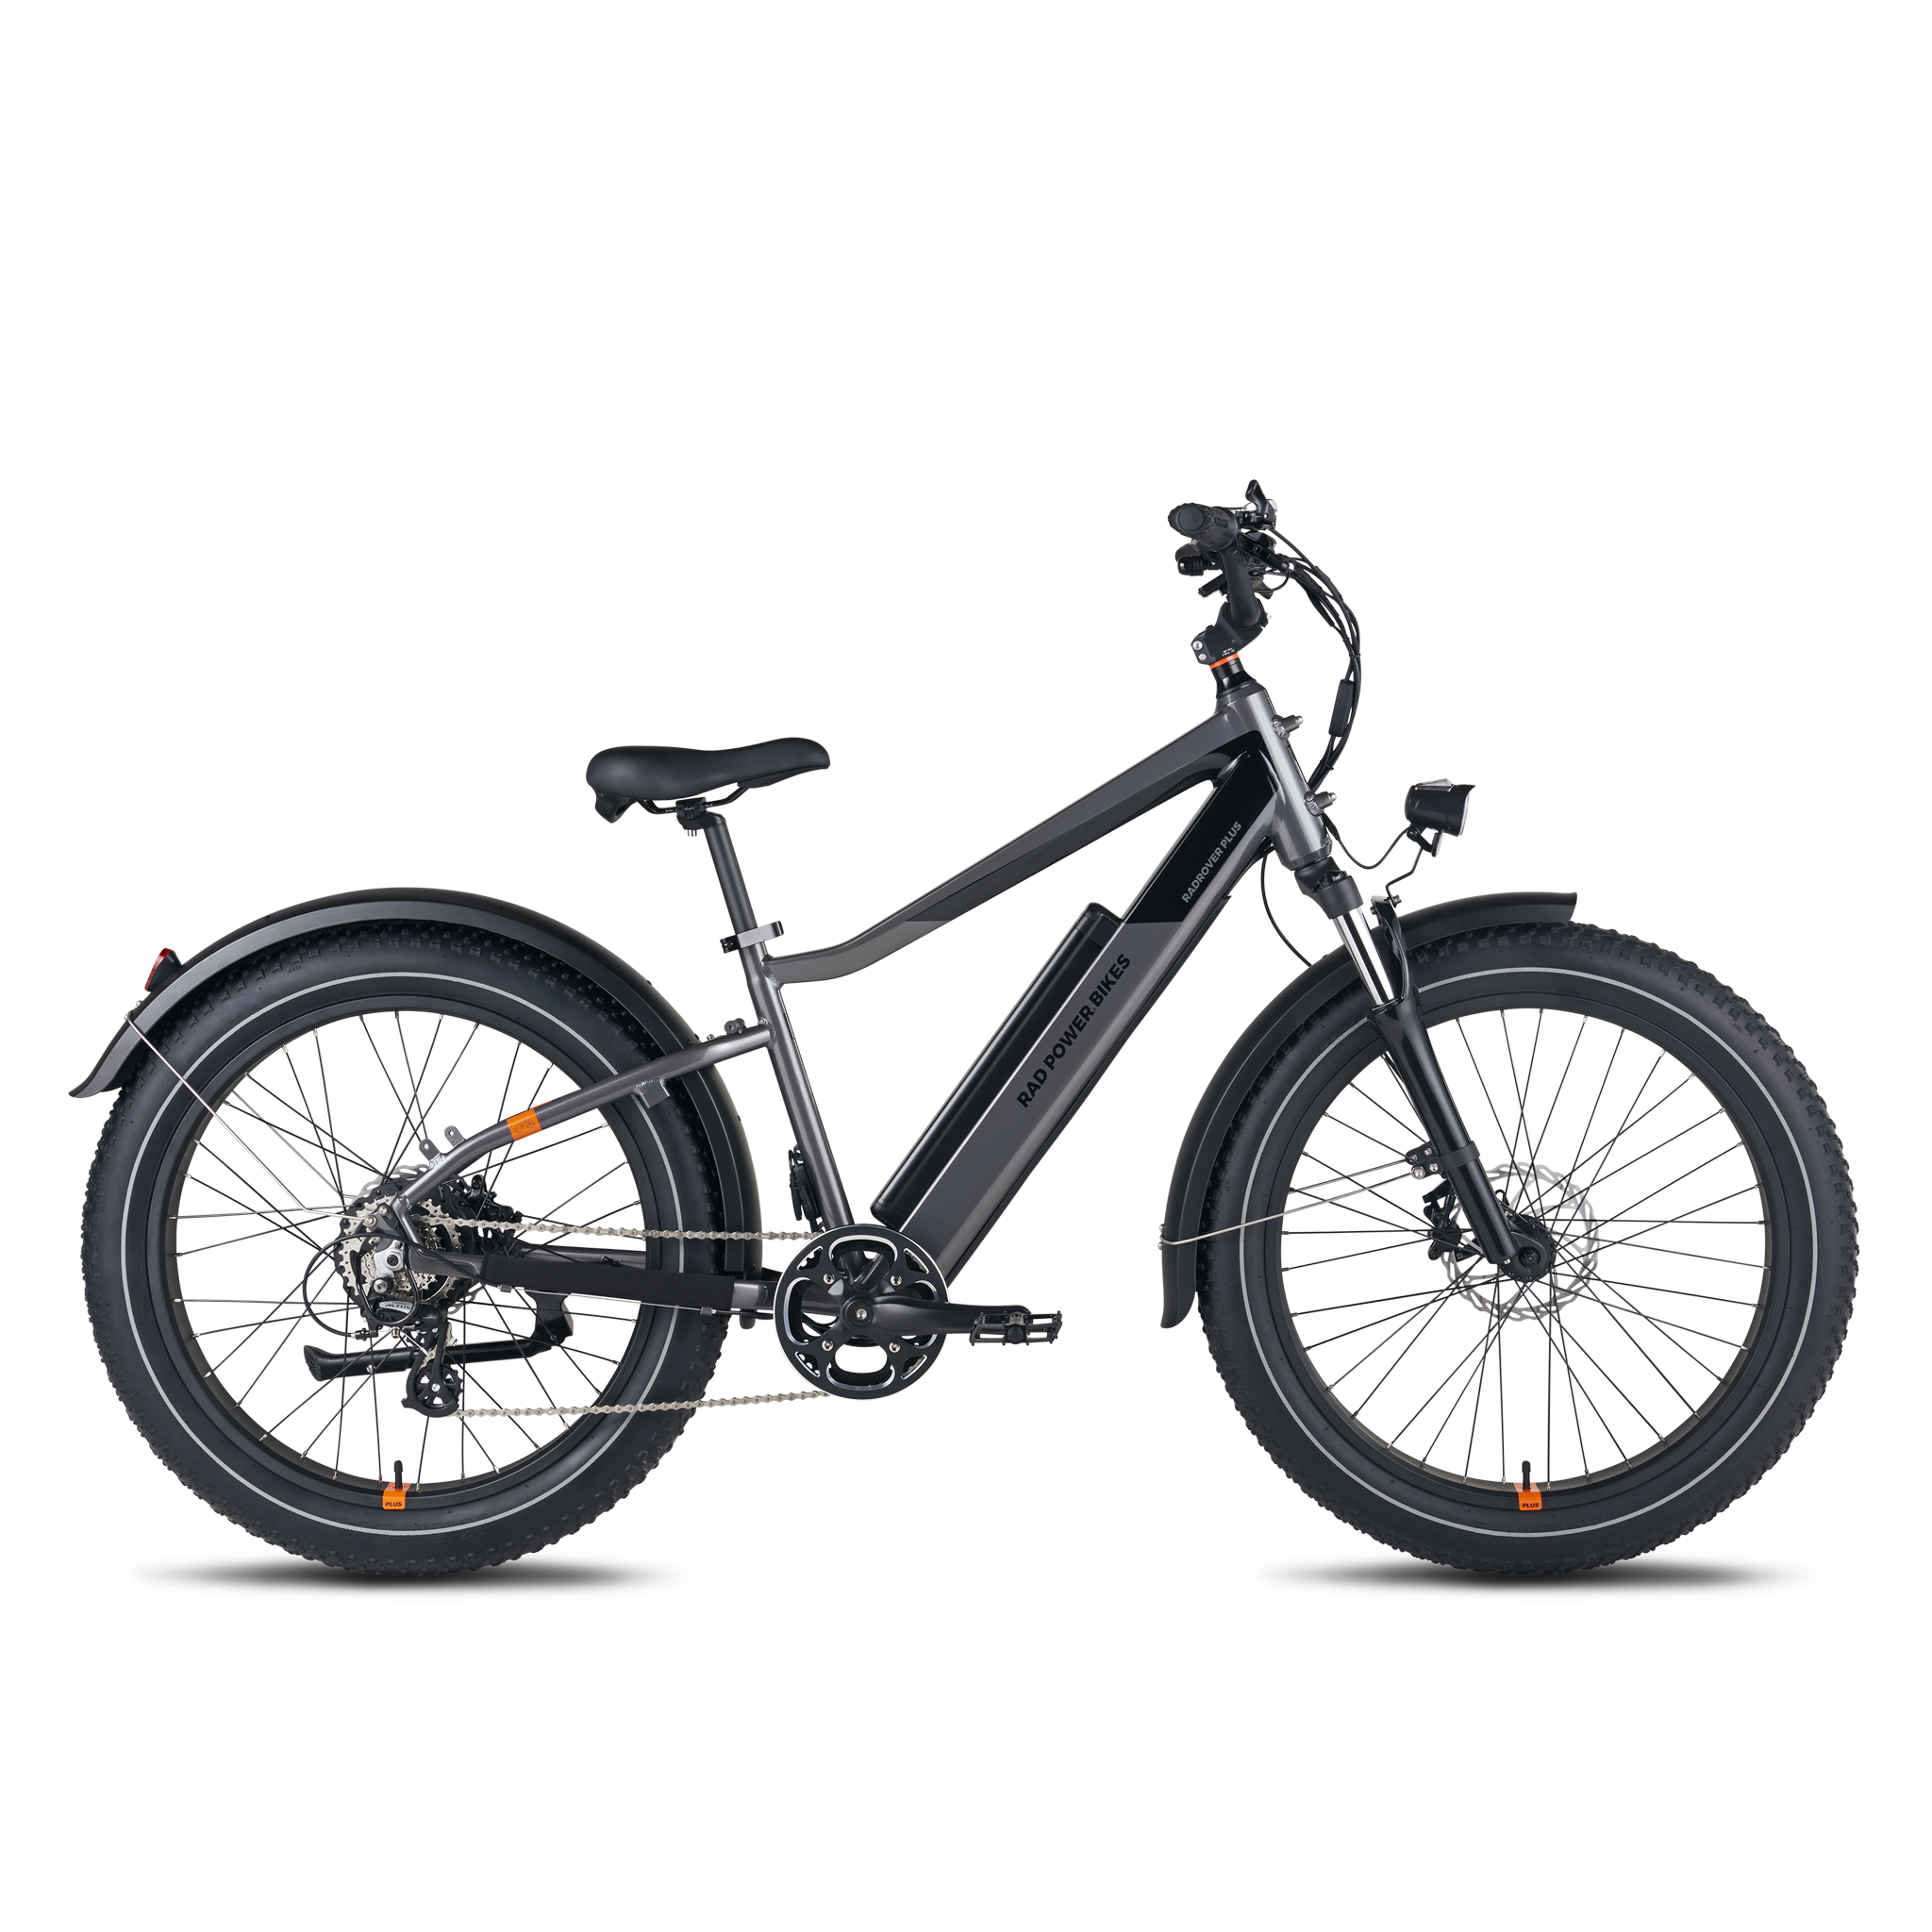 <p><strong>$1899.00</strong></p><p><a href="https://go.redirectingat.com?id=74968X1553576&url=https%3A%2F%2Fwww.radpowerbikes.com%2Fproducts%2Fradrover-plus-electric-fat-tire-bike&sref=https%3A%2F%2Fwww.menshealth.com%2Ftechnology-gear%2Fg39978784%2Frad-power-bikes-sale-may-2022%2F">Shop Now</a></p><p>$1,999</p>